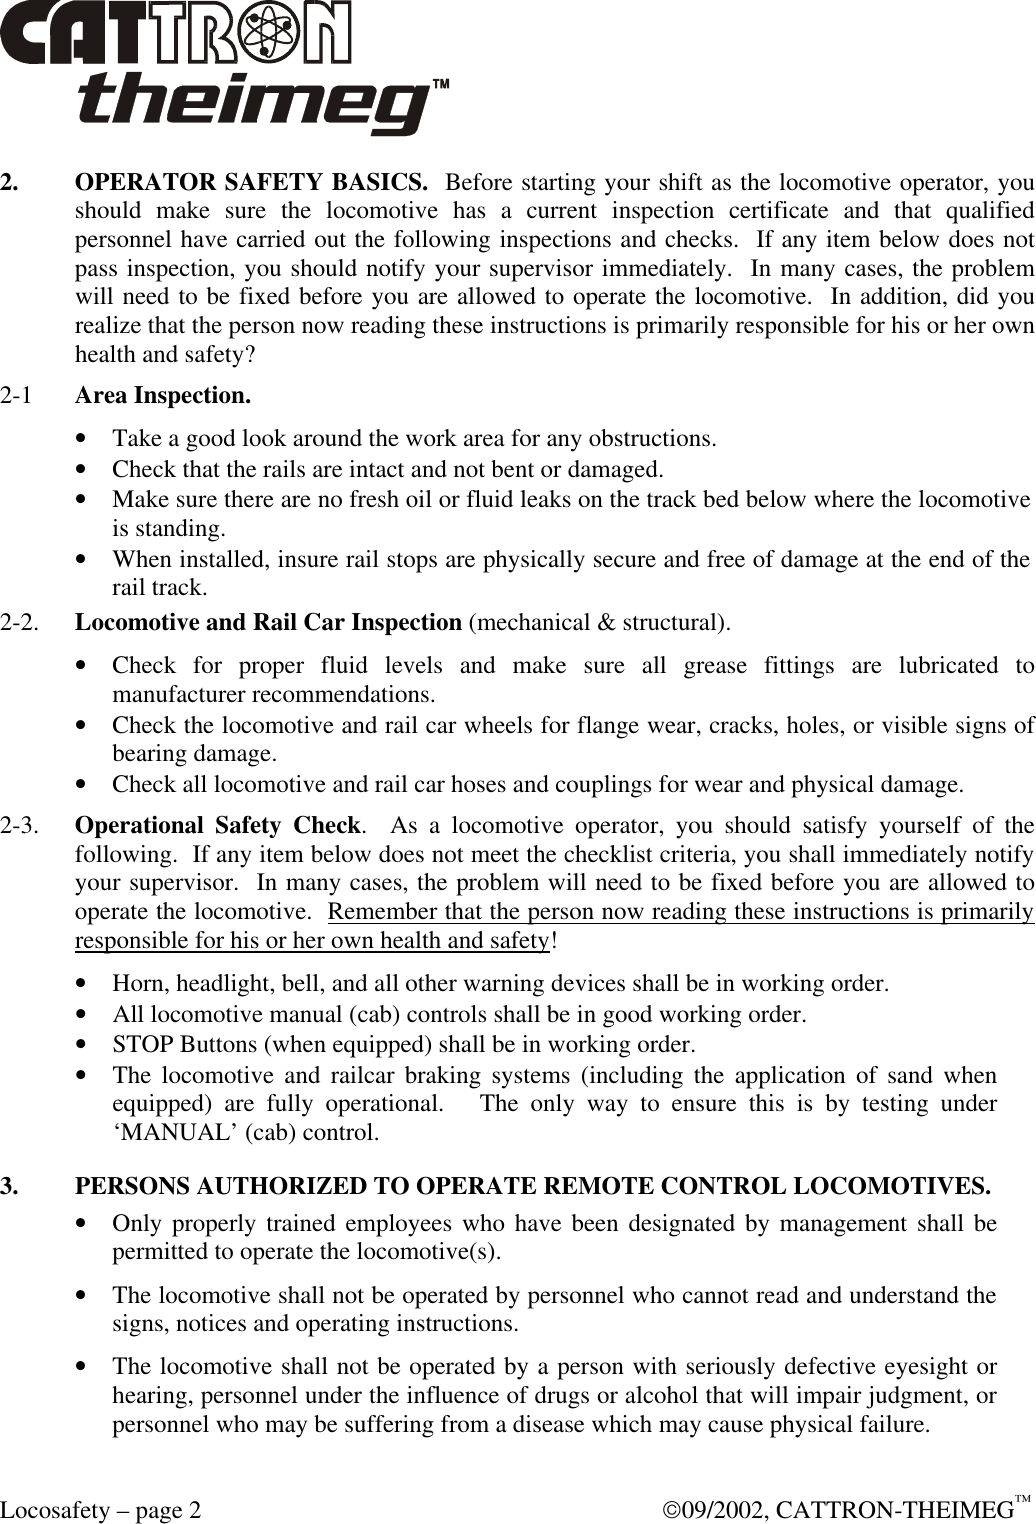  Locosafety – page 2  09/2002, CATTRON-THEIMEG™ 2. OPERATOR SAFETY BASICS.  Before starting your shift as the locomotive operator, you should make sure the locomotive has a current inspection certificate and that qualified personnel have carried out the following inspections and checks.  If any item below does not pass inspection, you should notify your supervisor immediately.  In many cases, the problem will need to be fixed before you are allowed to operate the locomotive.  In addition, did you realize that the person now reading these instructions is primarily responsible for his or her own health and safety? 2-1  Area Inspection.  • Take a good look around the work area for any obstructions. • Check that the rails are intact and not bent or damaged.  • Make sure there are no fresh oil or fluid leaks on the track bed below where the locomotive is standing. • When installed, insure rail stops are physically secure and free of damage at the end of the rail track.  2-2. Locomotive and Rail Car Inspection (mechanical &amp; structural). • Check for proper fluid levels and make sure all grease fittings are lubricated to manufacturer recommendations.  • Check the locomotive and rail car wheels for flange wear, cracks, holes, or visible signs of bearing damage. • Check all locomotive and rail car hoses and couplings for wear and physical damage.  2-3. Operational Safety Check.  As a locomotive operator, you should satisfy yourself of the following.  If any item below does not meet the checklist criteria, you shall immediately notify your supervisor.  In many cases, the problem will need to be fixed before you are allowed to operate the locomotive.  Remember that the person now reading these instructions is primarily responsible for his or her own health and safety! • Horn, headlight, bell, and all other warning devices shall be in working order. • All locomotive manual (cab) controls shall be in good working order. • STOP Buttons (when equipped) shall be in working order.  • The locomotive and railcar braking systems (including the application of sand when equipped) are fully operational.   The only way to ensure this is by testing under ‘MANUAL’ (cab) control. 3. PERSONS AUTHORIZED TO OPERATE REMOTE CONTROL LOCOMOTIVES. • Only properly trained employees who have been designated by management shall be permitted to operate the locomotive(s). • The locomotive shall not be operated by personnel who cannot read and understand the signs, notices and operating instructions. • The locomotive shall not be operated by a person with seriously defective eyesight or hearing, personnel under the influence of drugs or alcohol that will impair judgment, or personnel who may be suffering from a disease which may cause physical failure. 